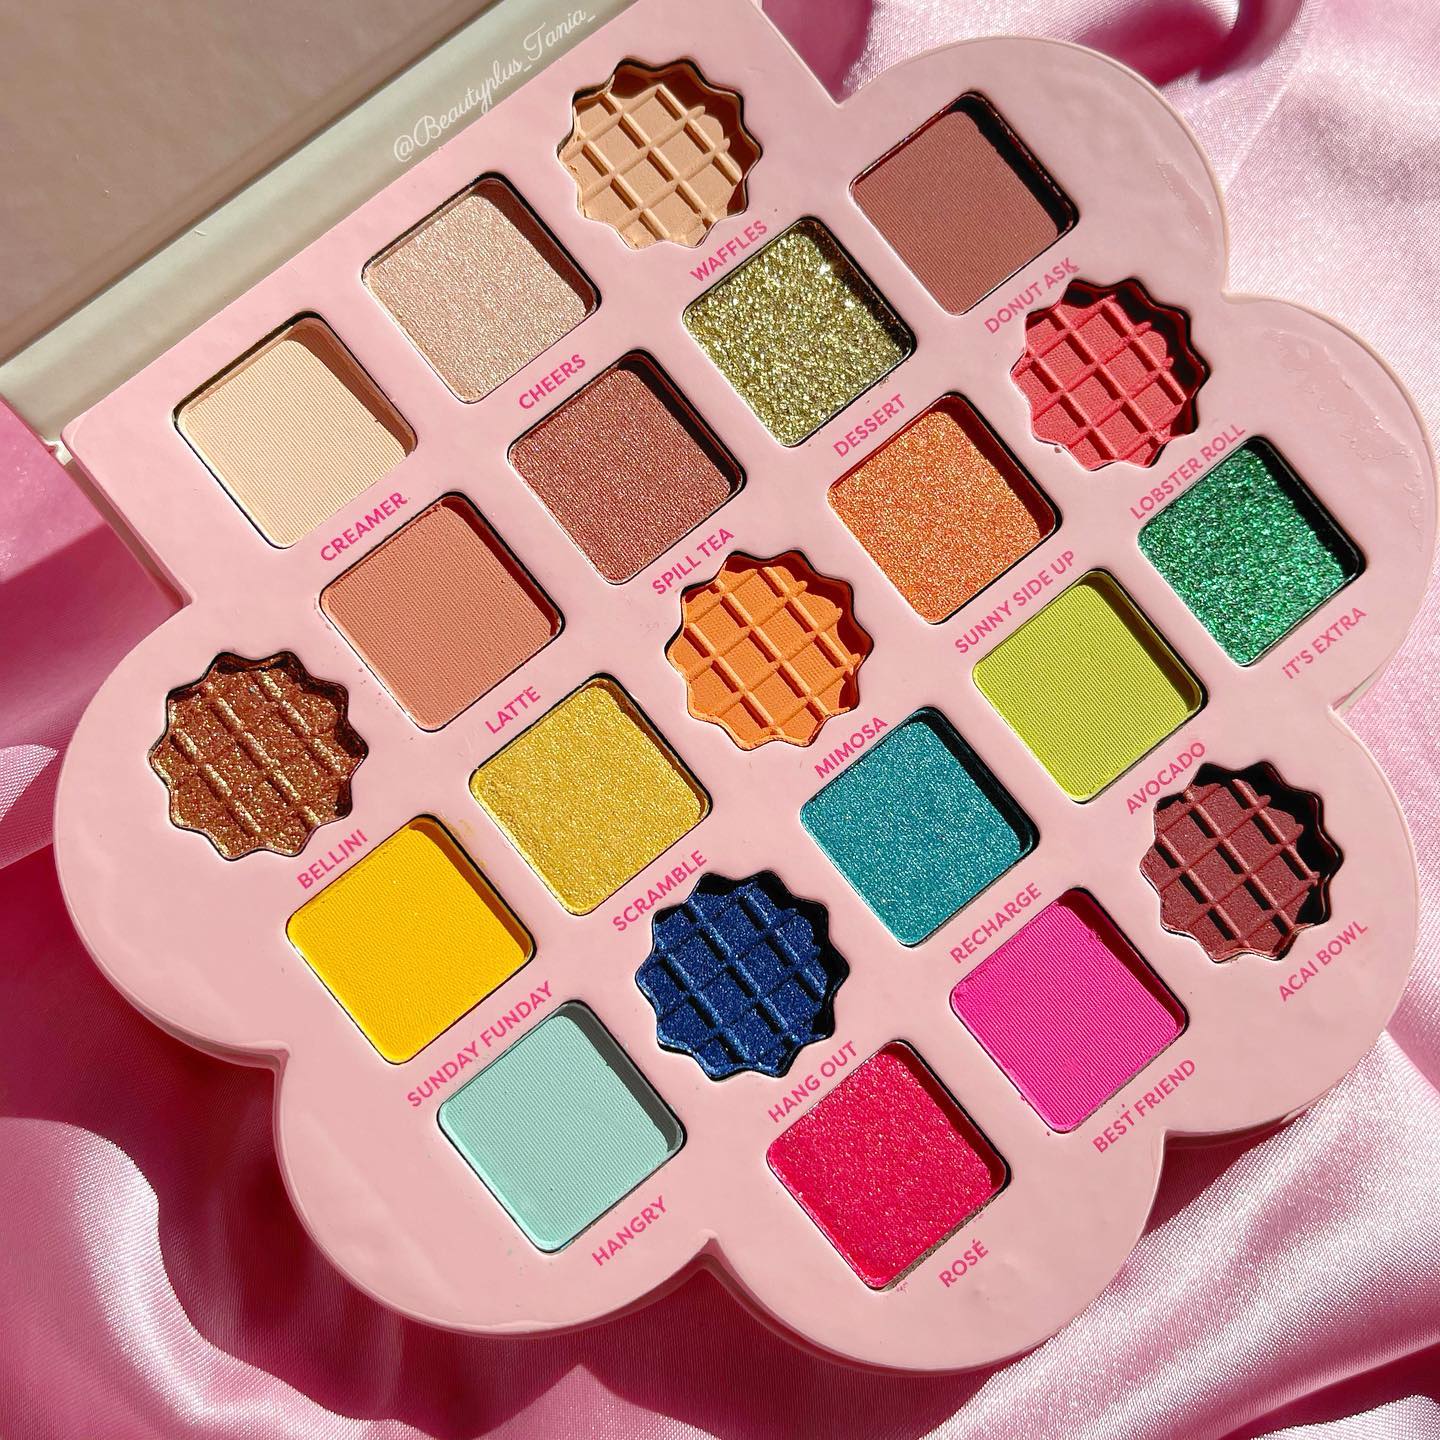 Profusion - Afternoon Tea Love You So Brunch Palette